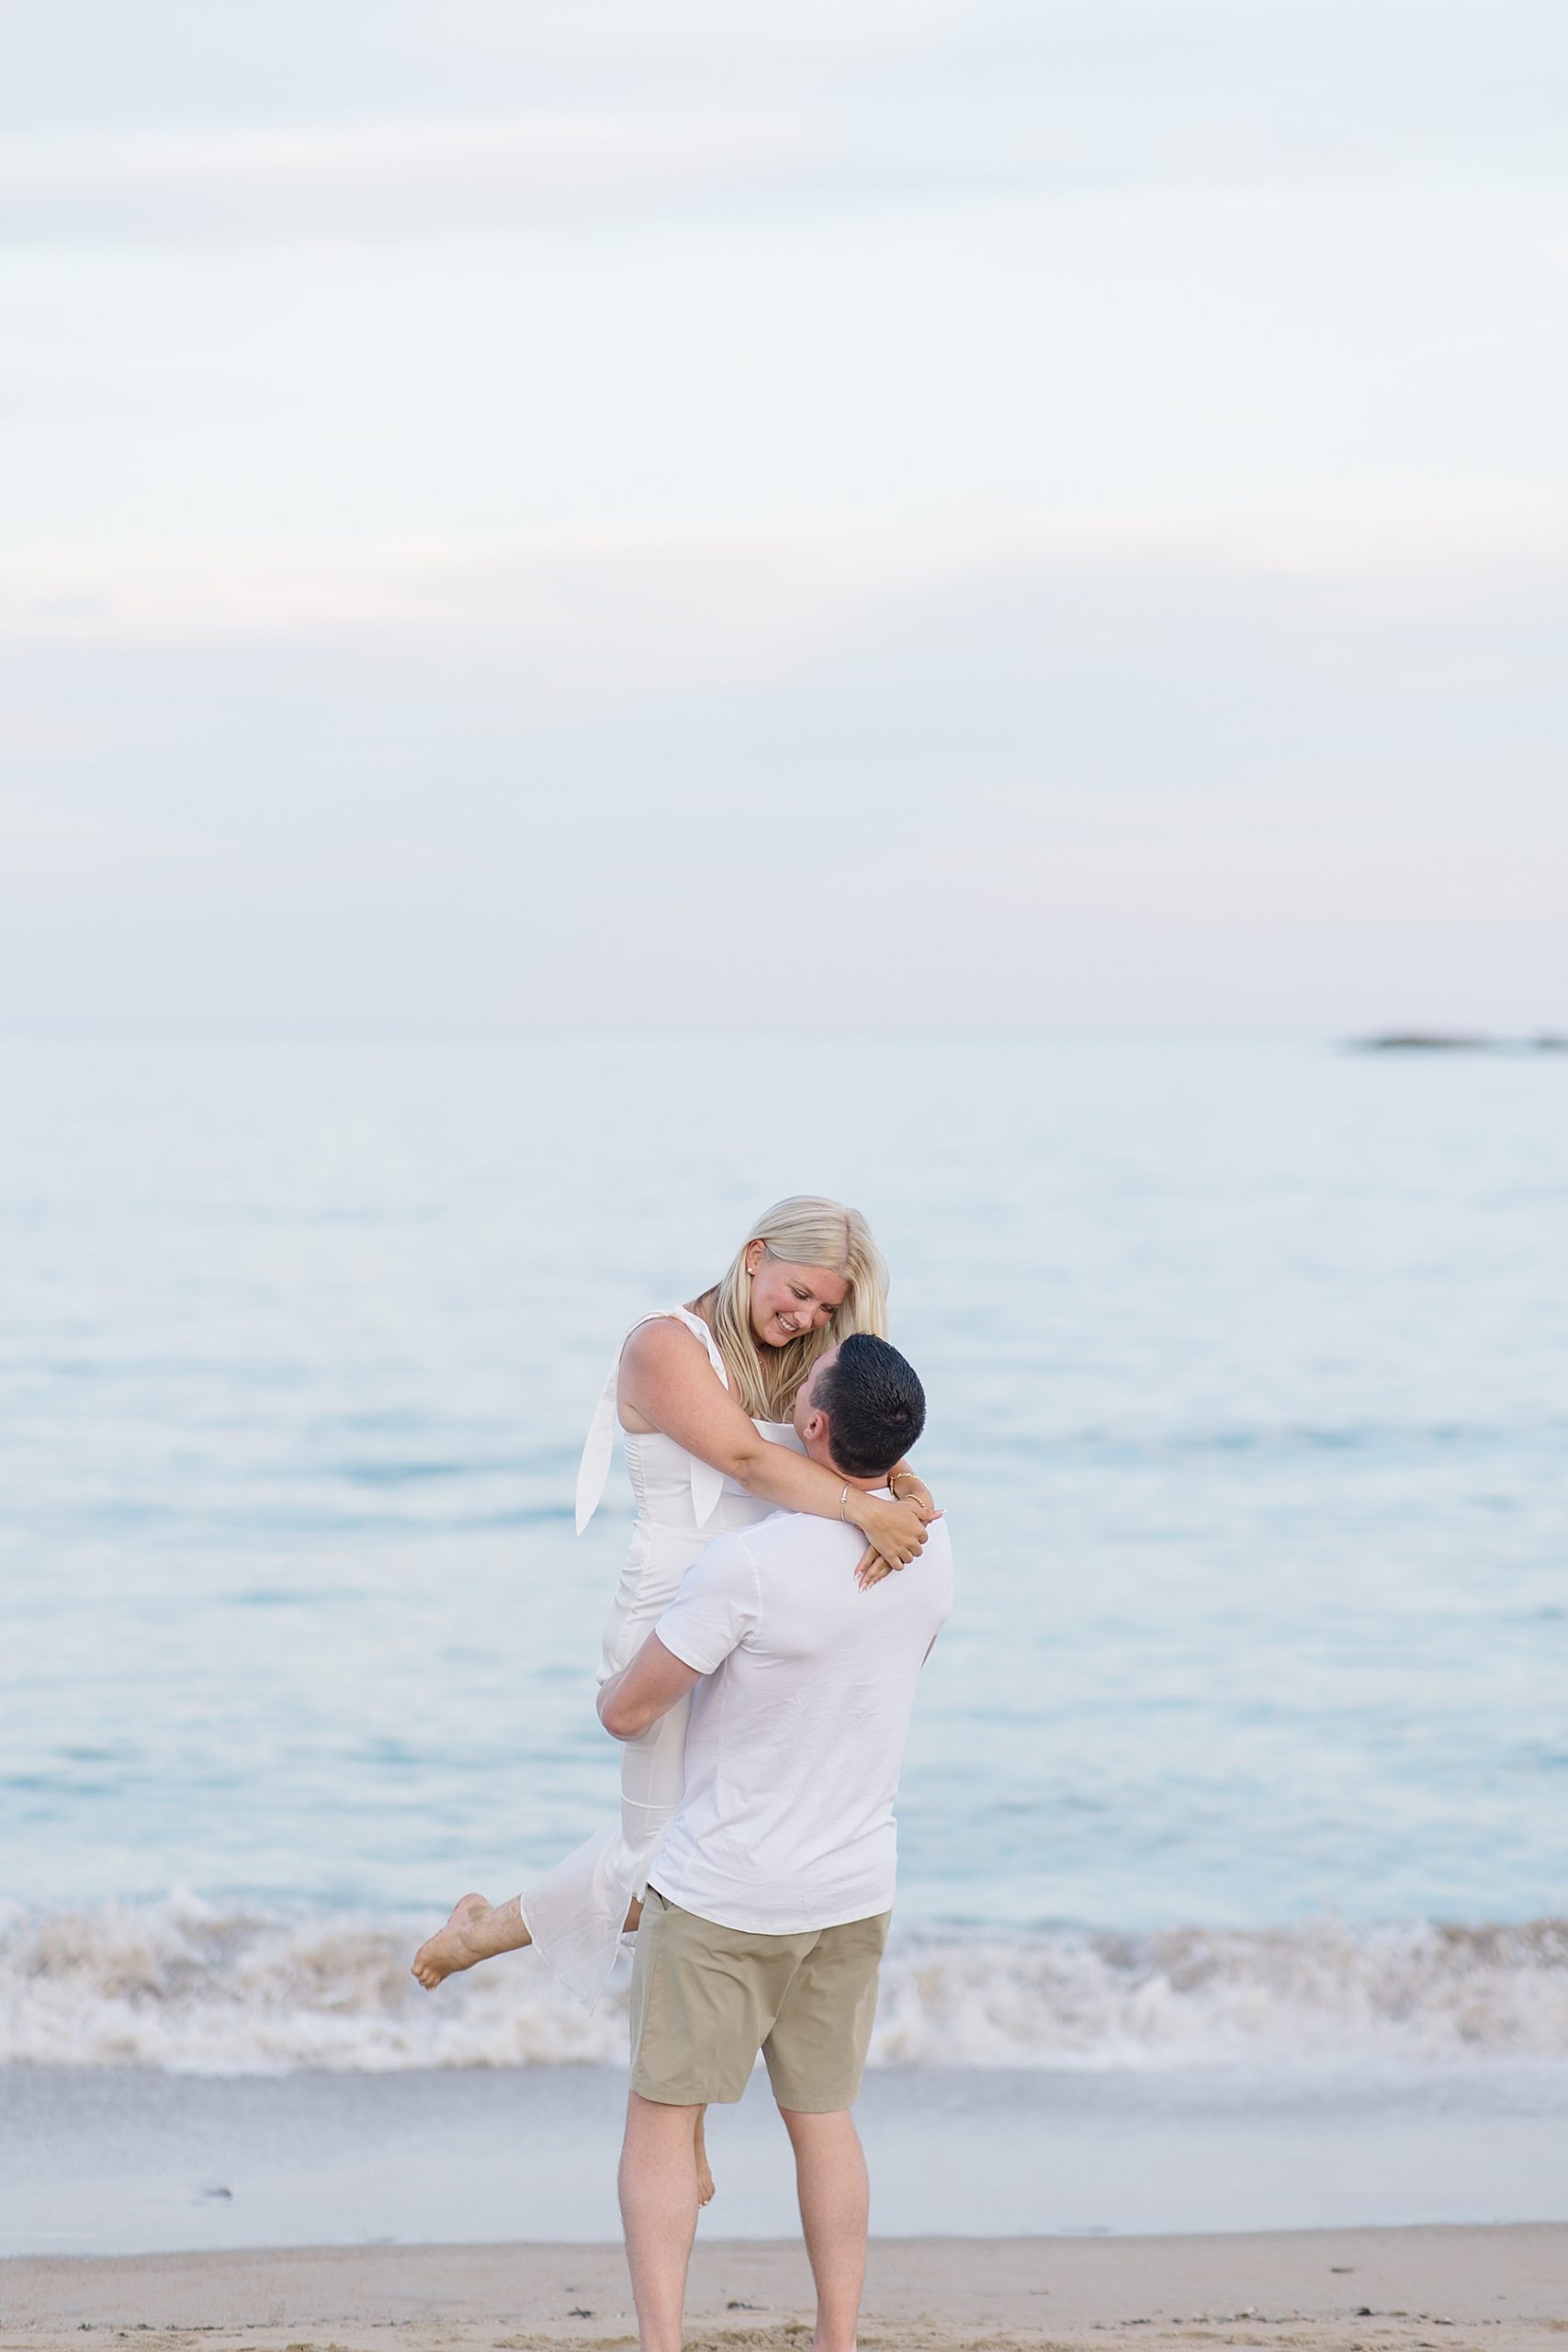 man lifts his fiancé up by the shoreline